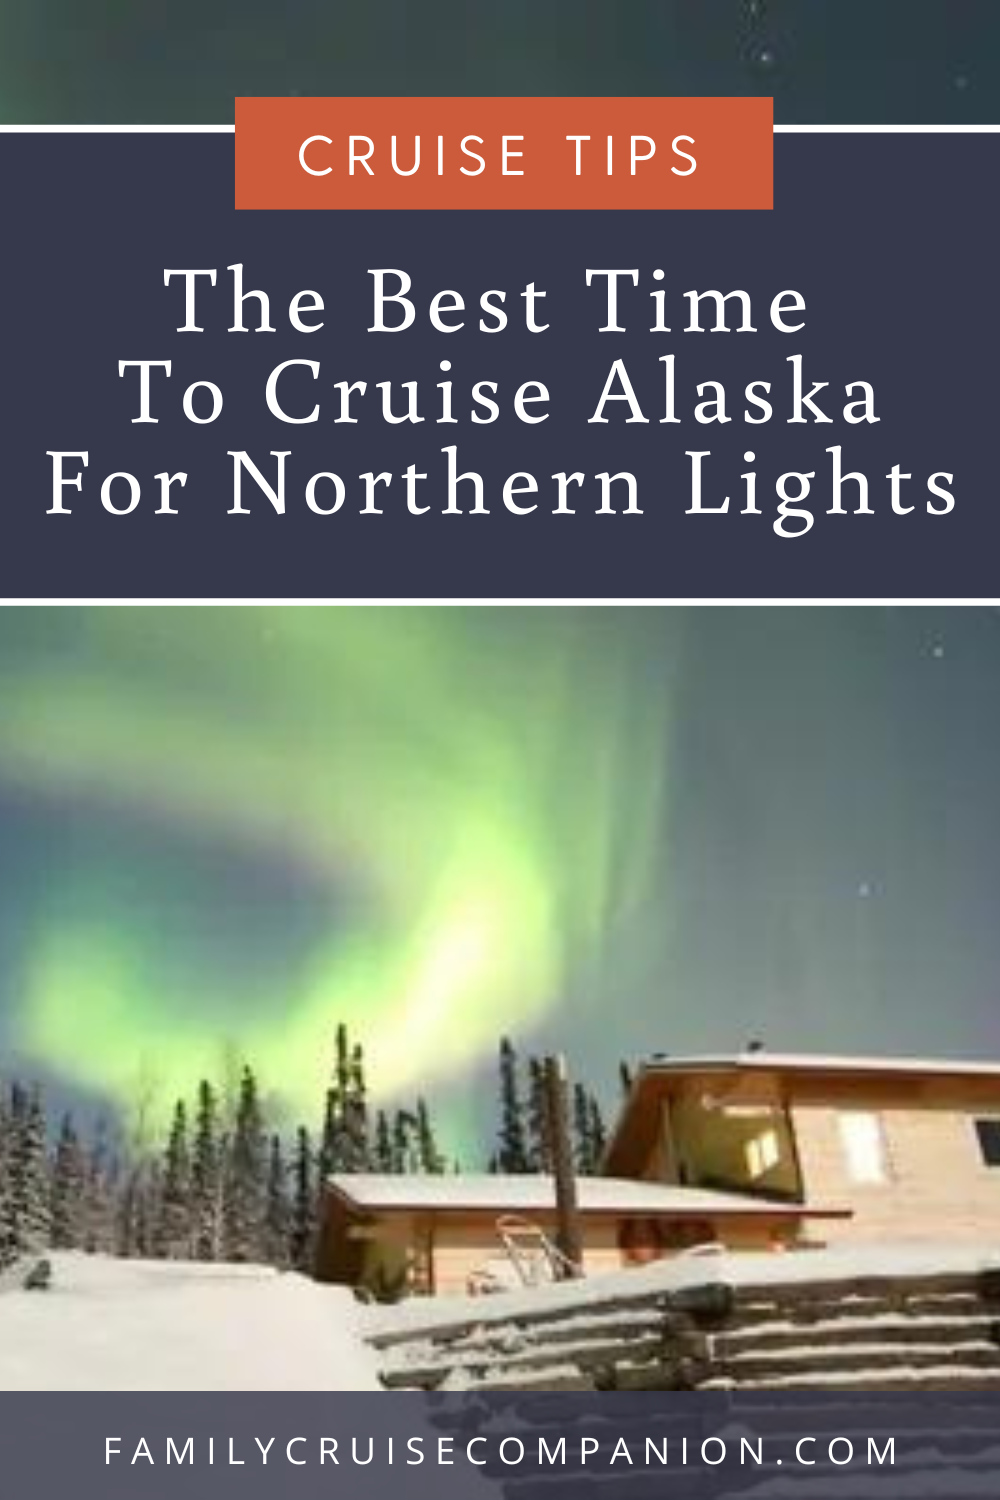 The Best Time To Cruise Alaska For Northern Lights.